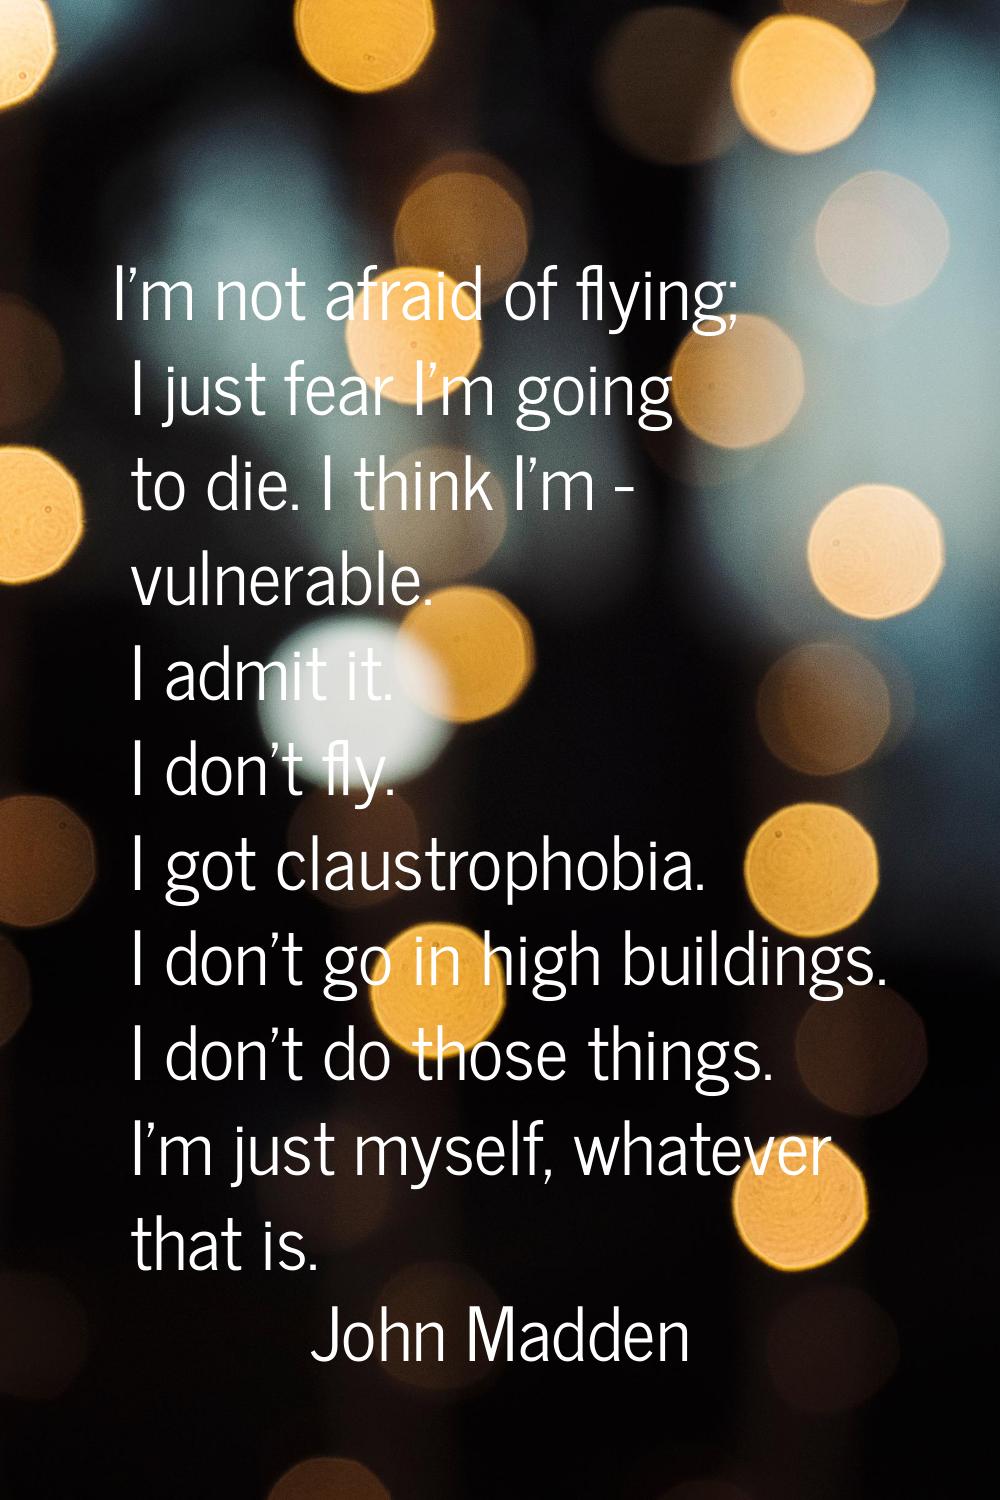 I'm not afraid of flying; I just fear I'm going to die. I think I'm - vulnerable. I admit it. I don